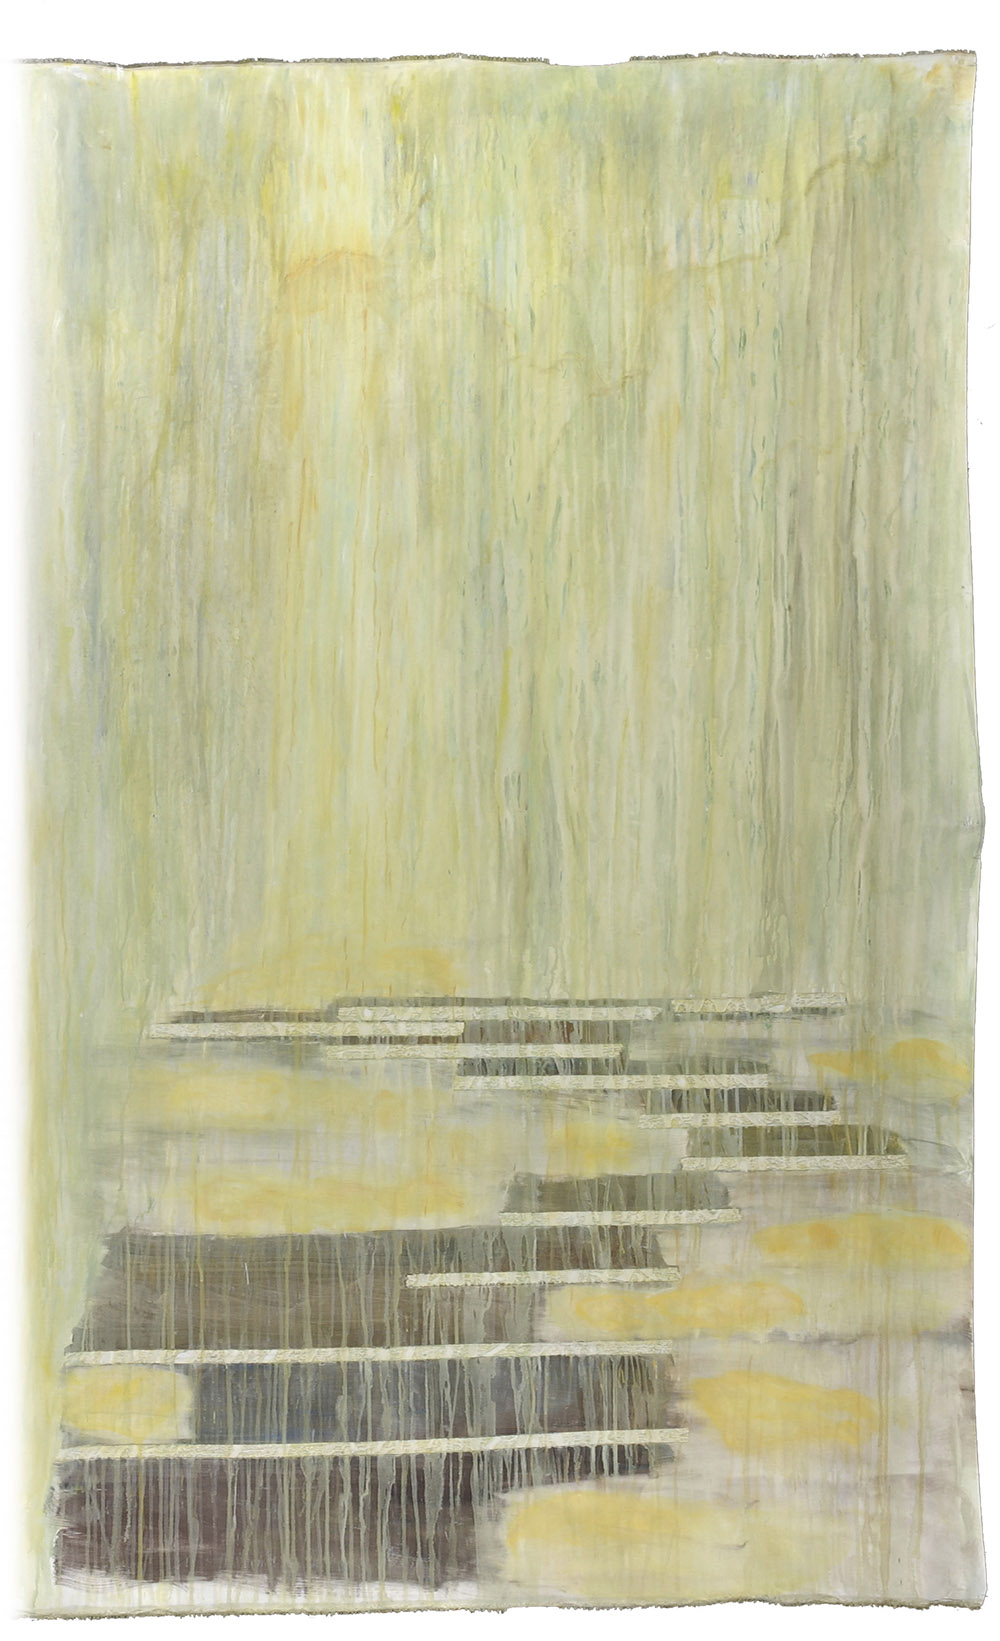 1.e-Ono-Long-and-Difficult-Road-2008.-Acrylic-on-canvas-approx.-200-x-120-cm-x.jpg